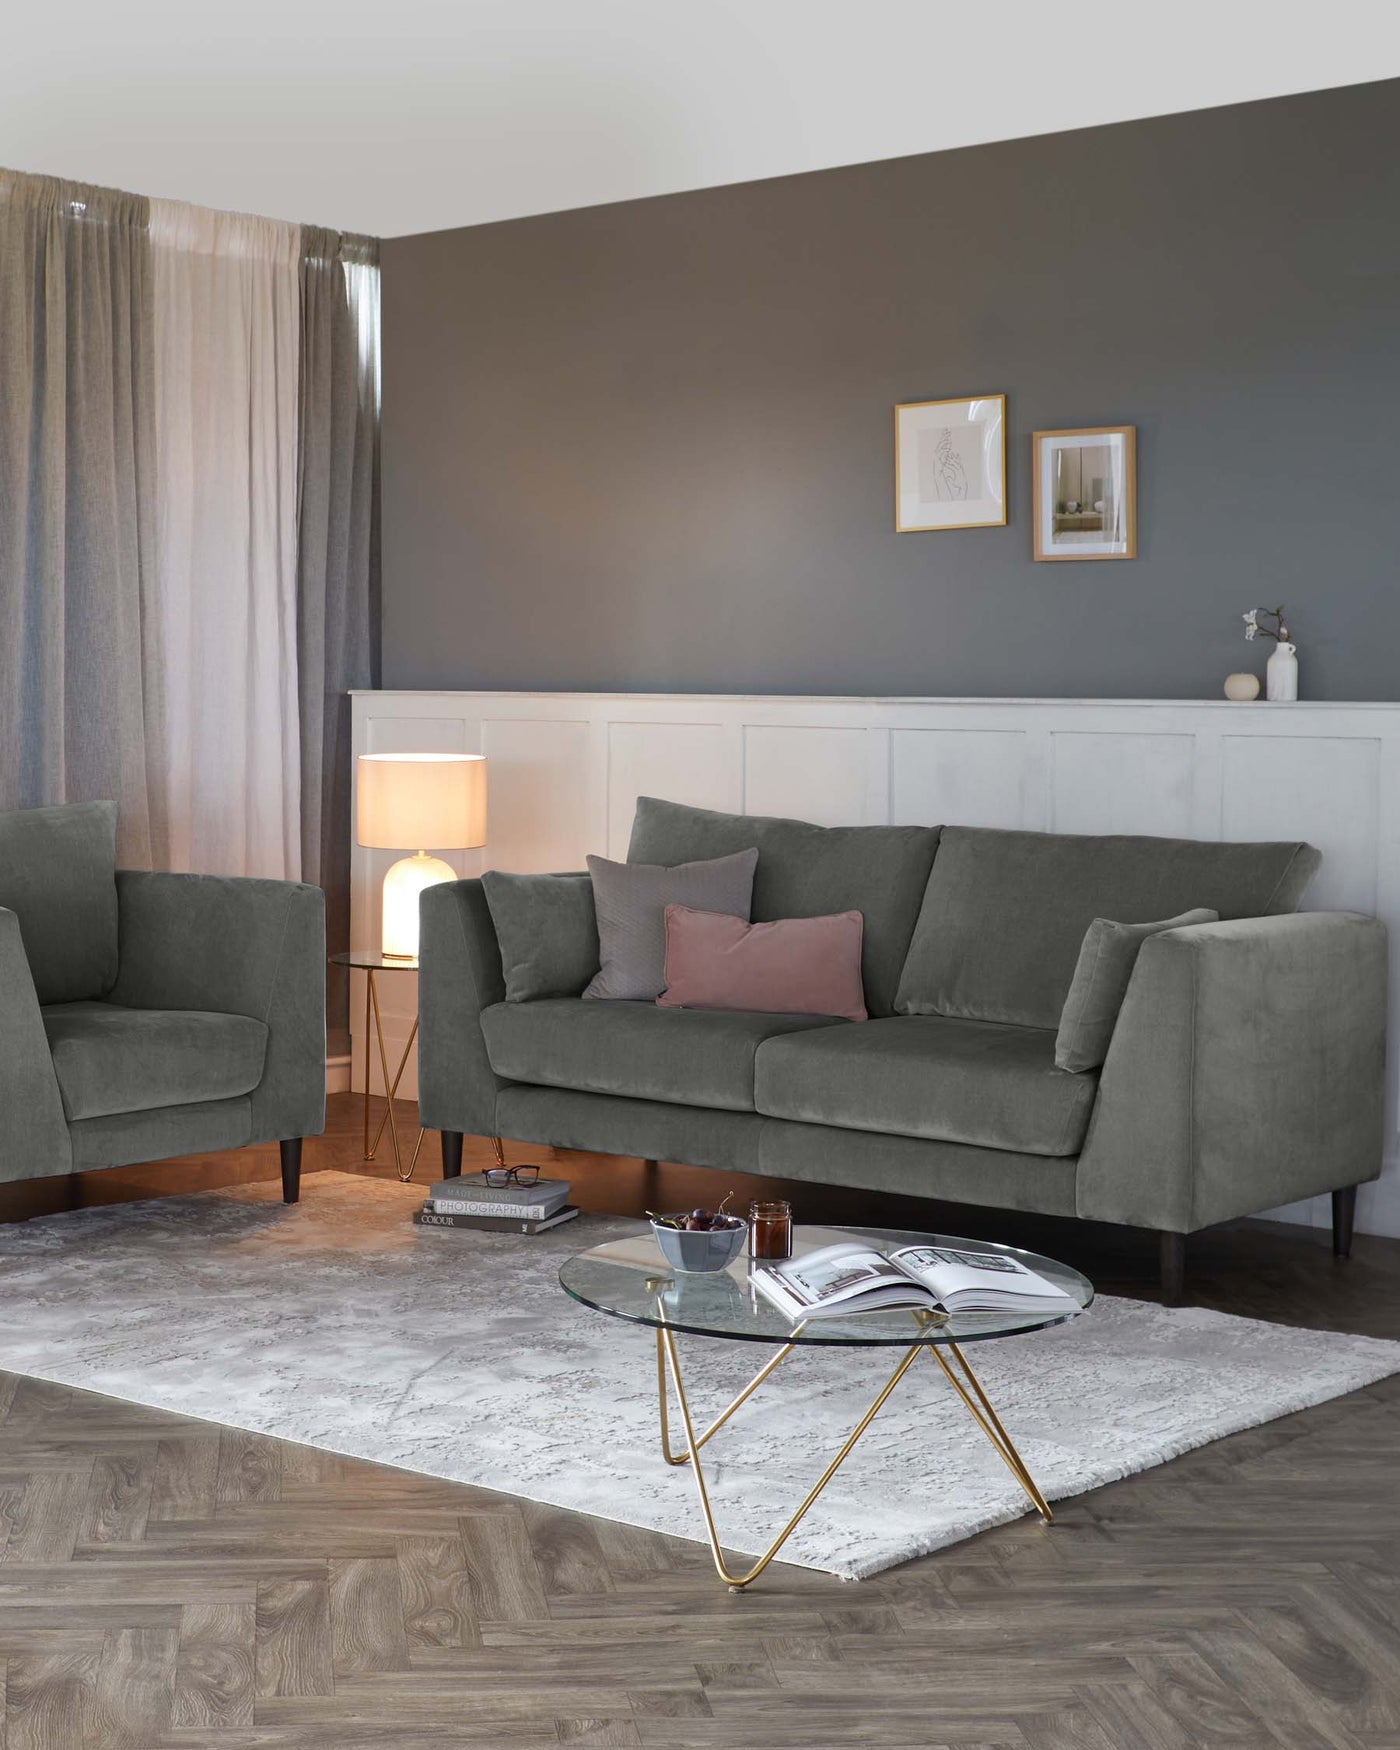 A contemporary living room setting featuring a three-seater upholstered sofa in a muted green shade with plush cushions, flanked by a matching armchair. In front of the sofa is a round glass-top coffee table with a geometric gold metal base, all situated on a textured off-white area rug over wood flooring. A white floor lamp providing a warm glow completes the inviting scene.